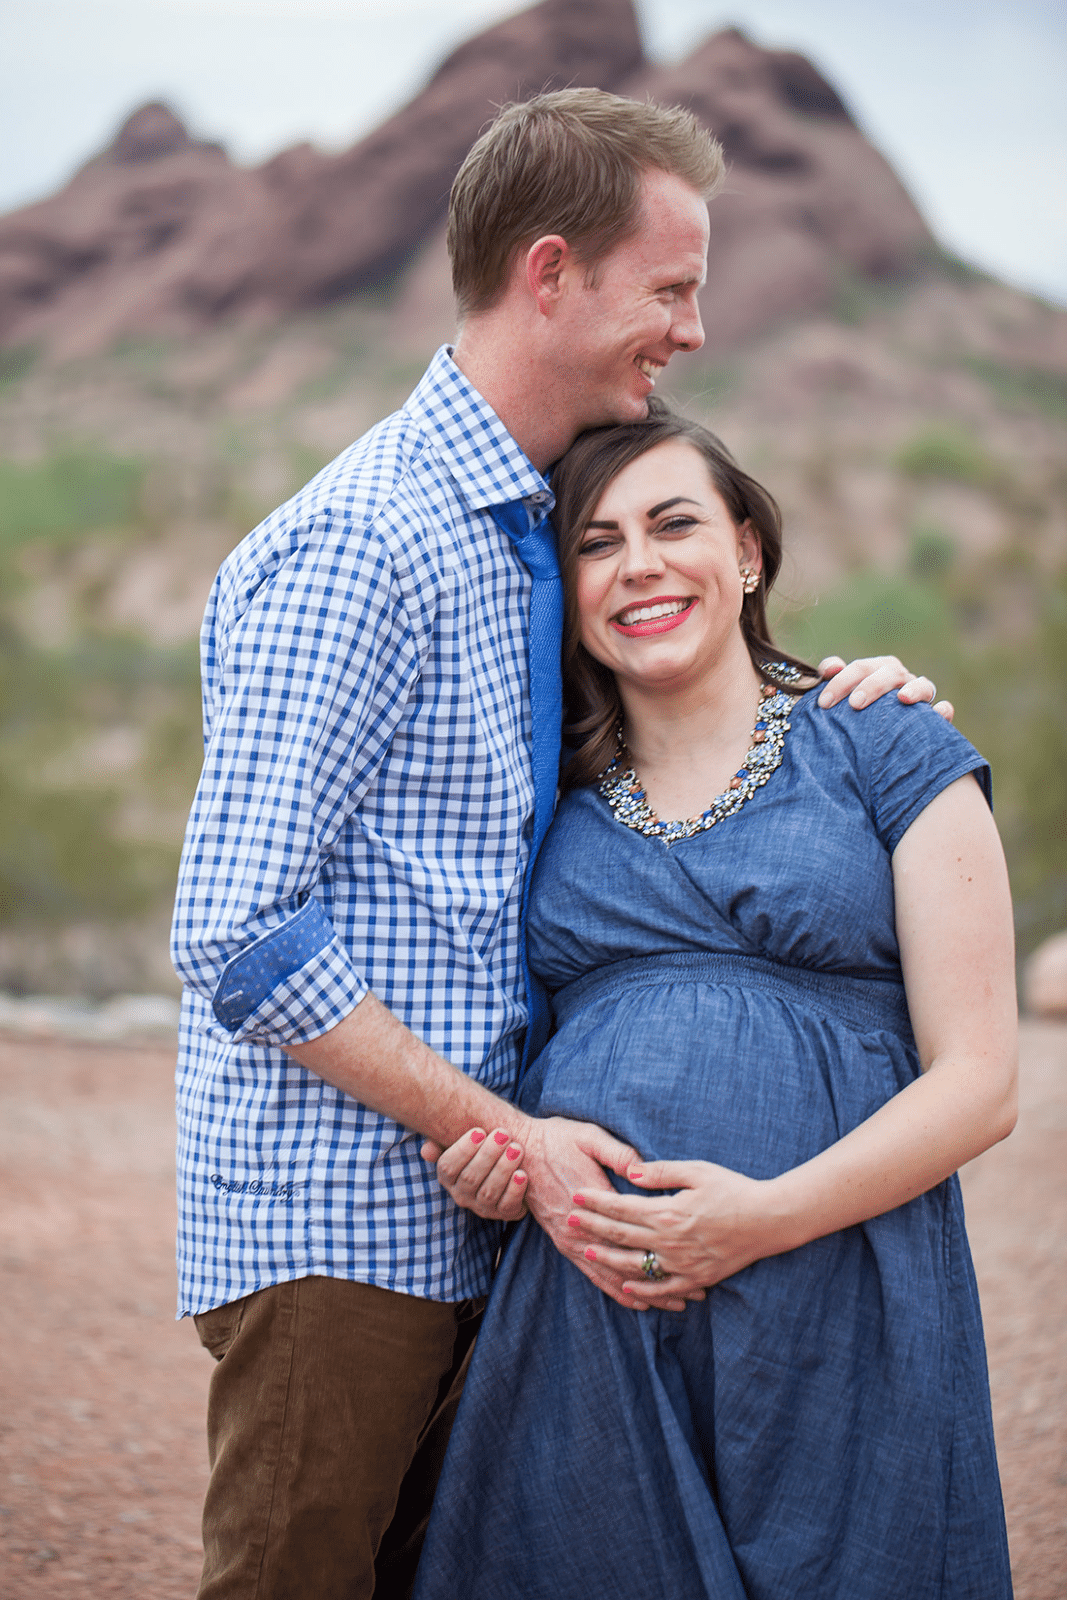 Couple maternity picture ideas. 